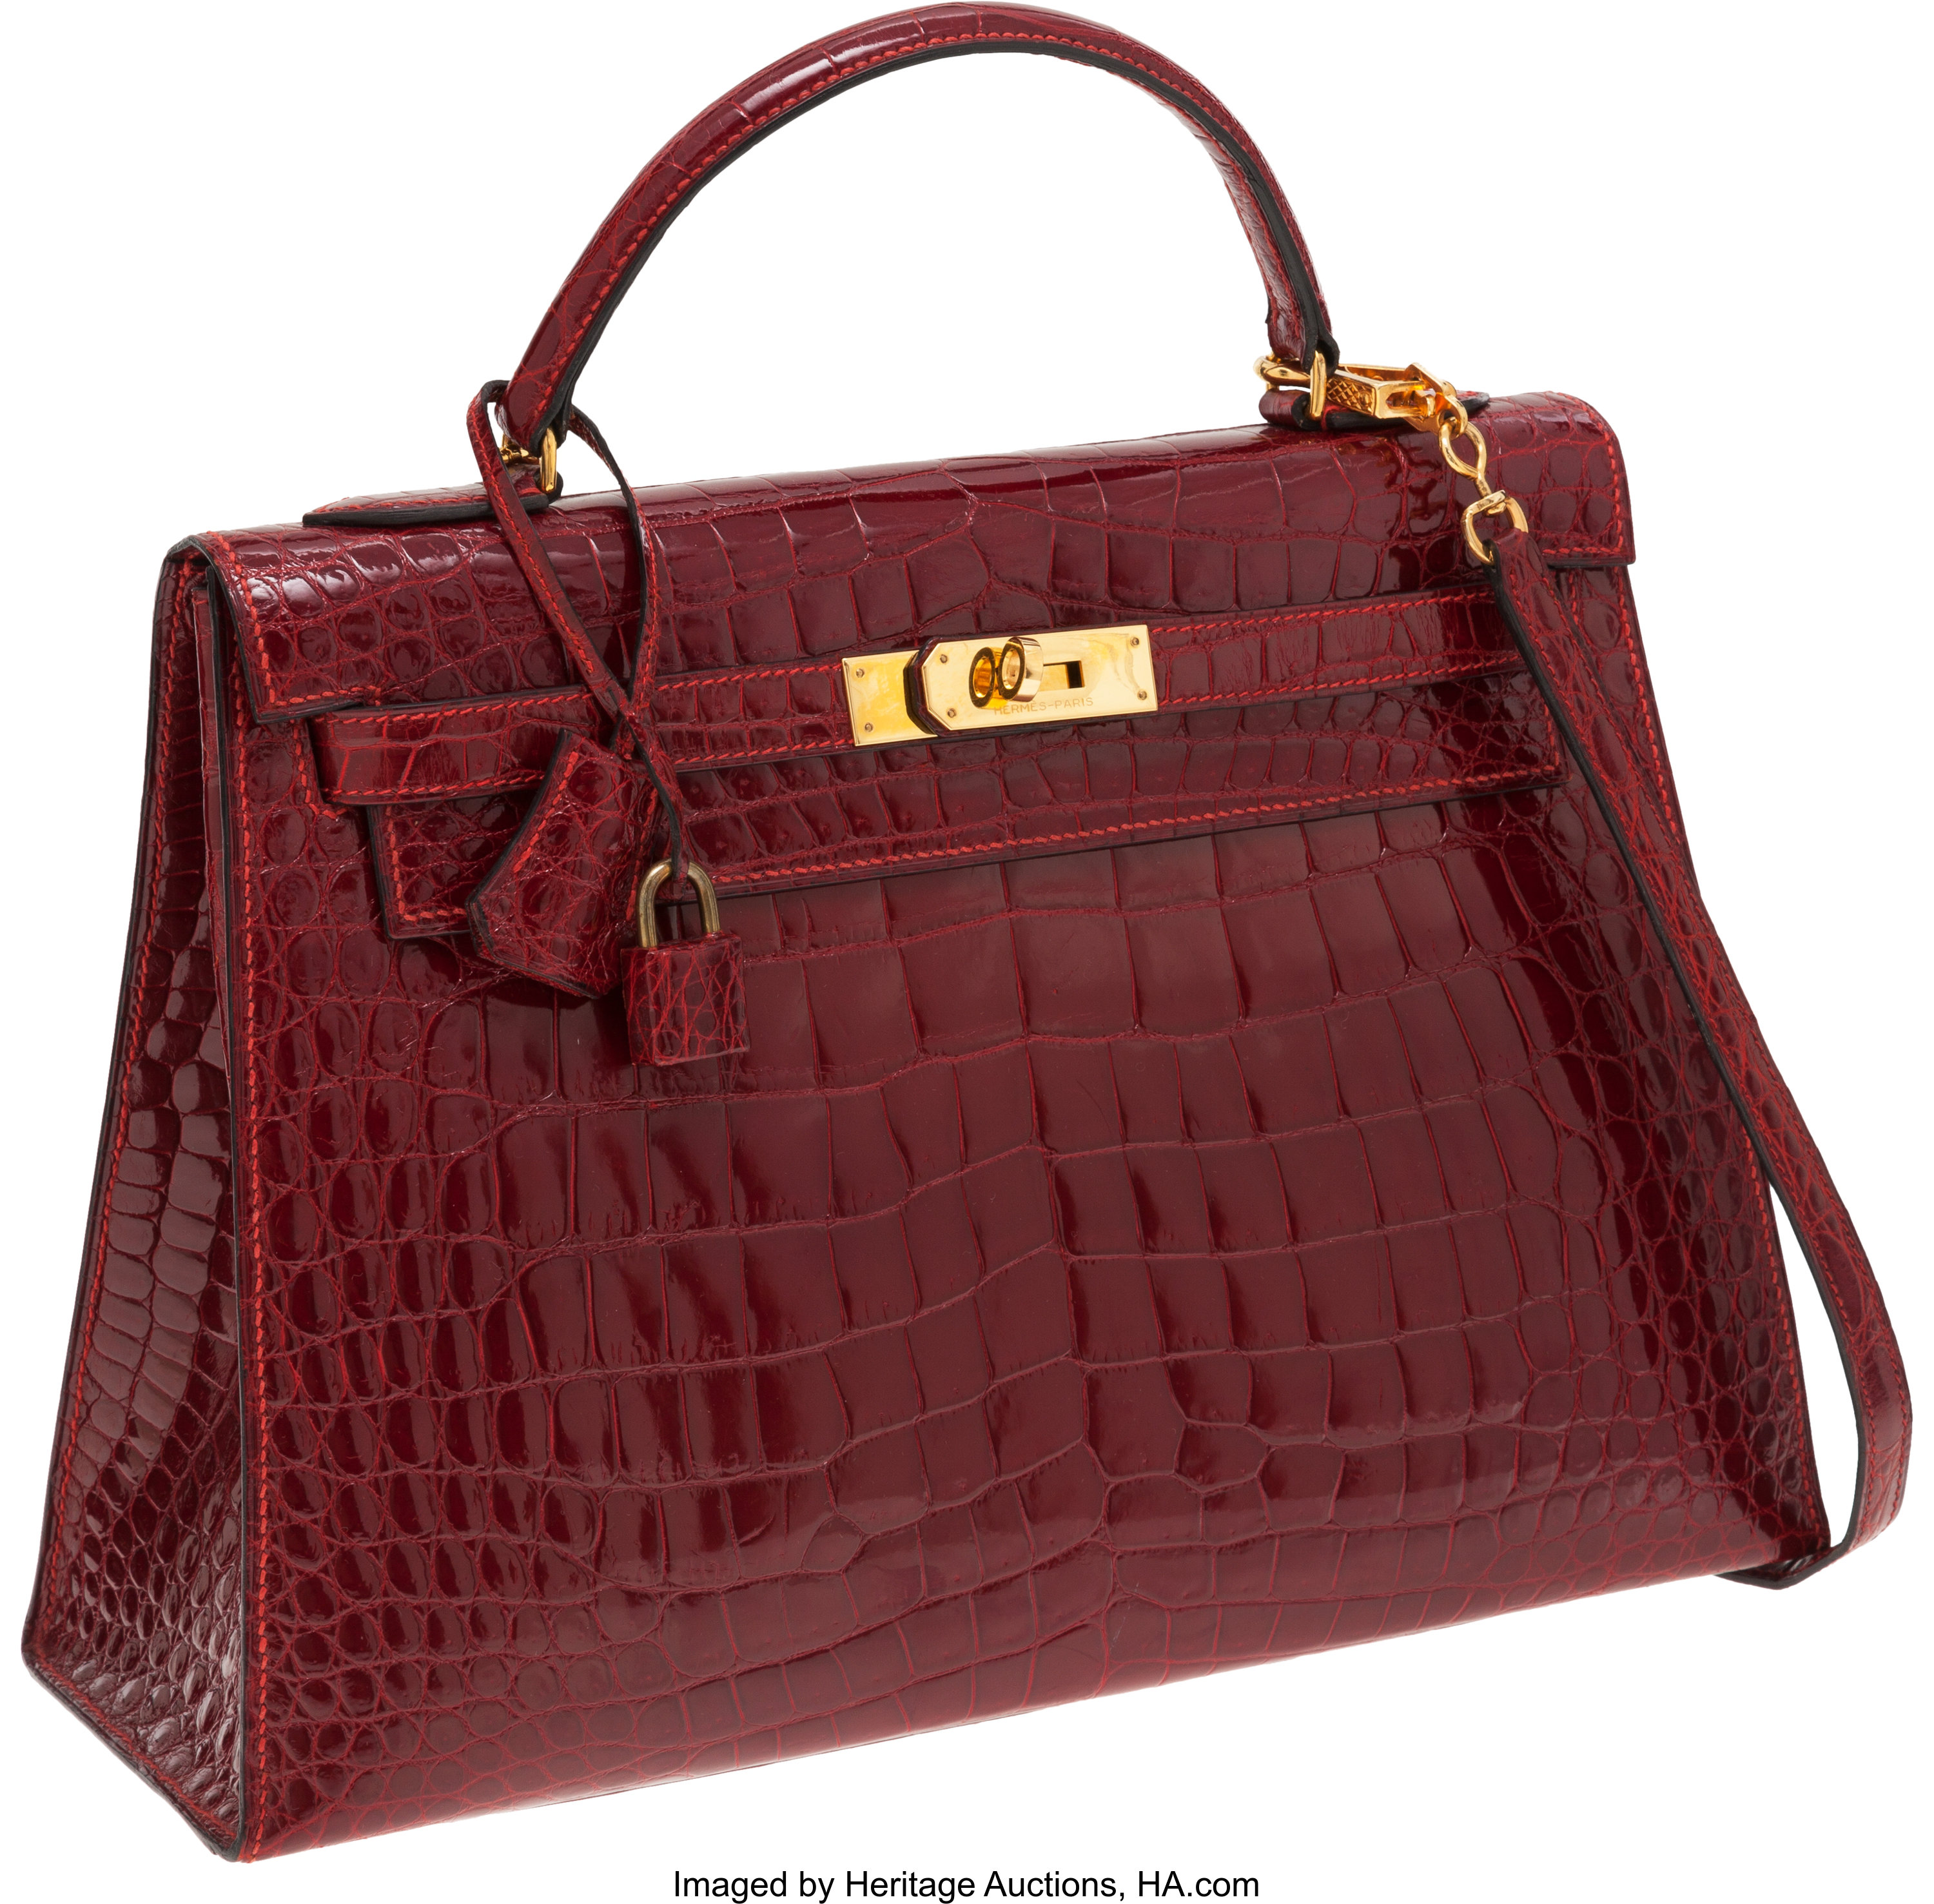 Hermes 32cm Shiny Rouge H Caiman Crocodile Sellier Kelly Bag with